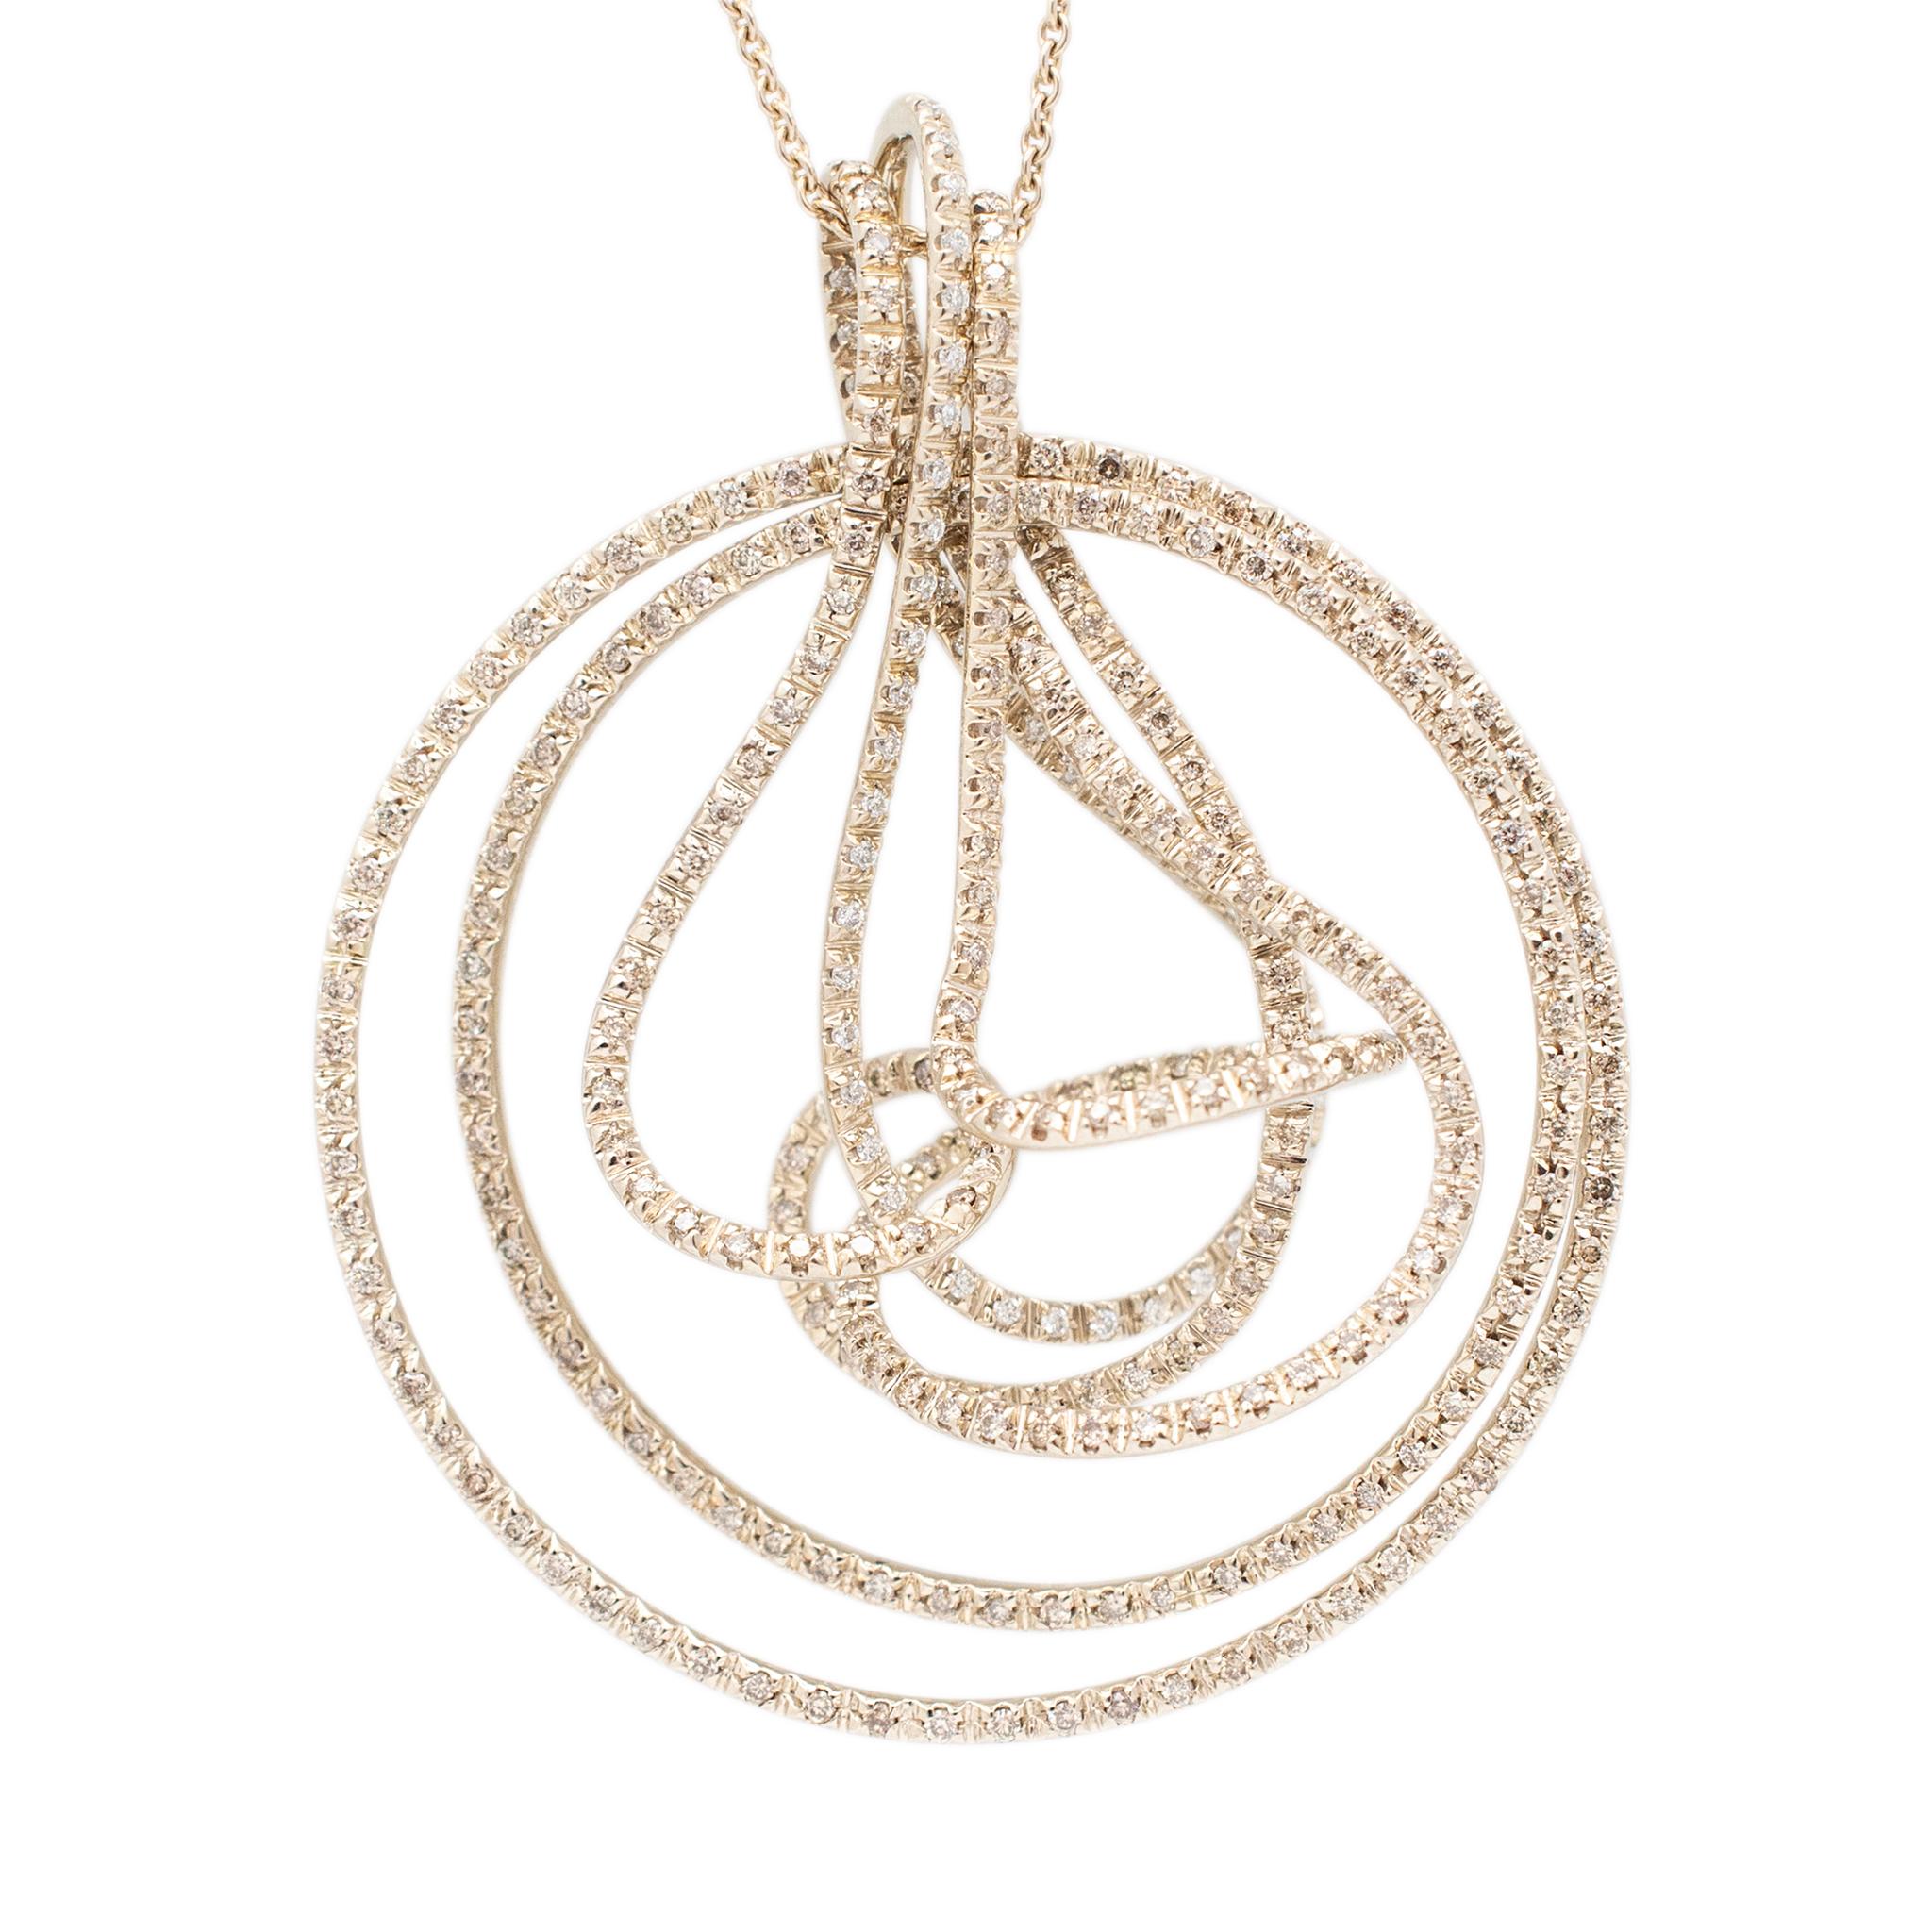 Brand: H. Stern

Gender: Ladies

Metal Type: 18K Noble Gold 

Length: 31.00 inches

Width: 1.00 mm

Diameter: 1.75 inches

Weight: 22.36grams

18K Noble Gold single strand opera diamond necklace. The metal was tested and determined to be 18K yellow